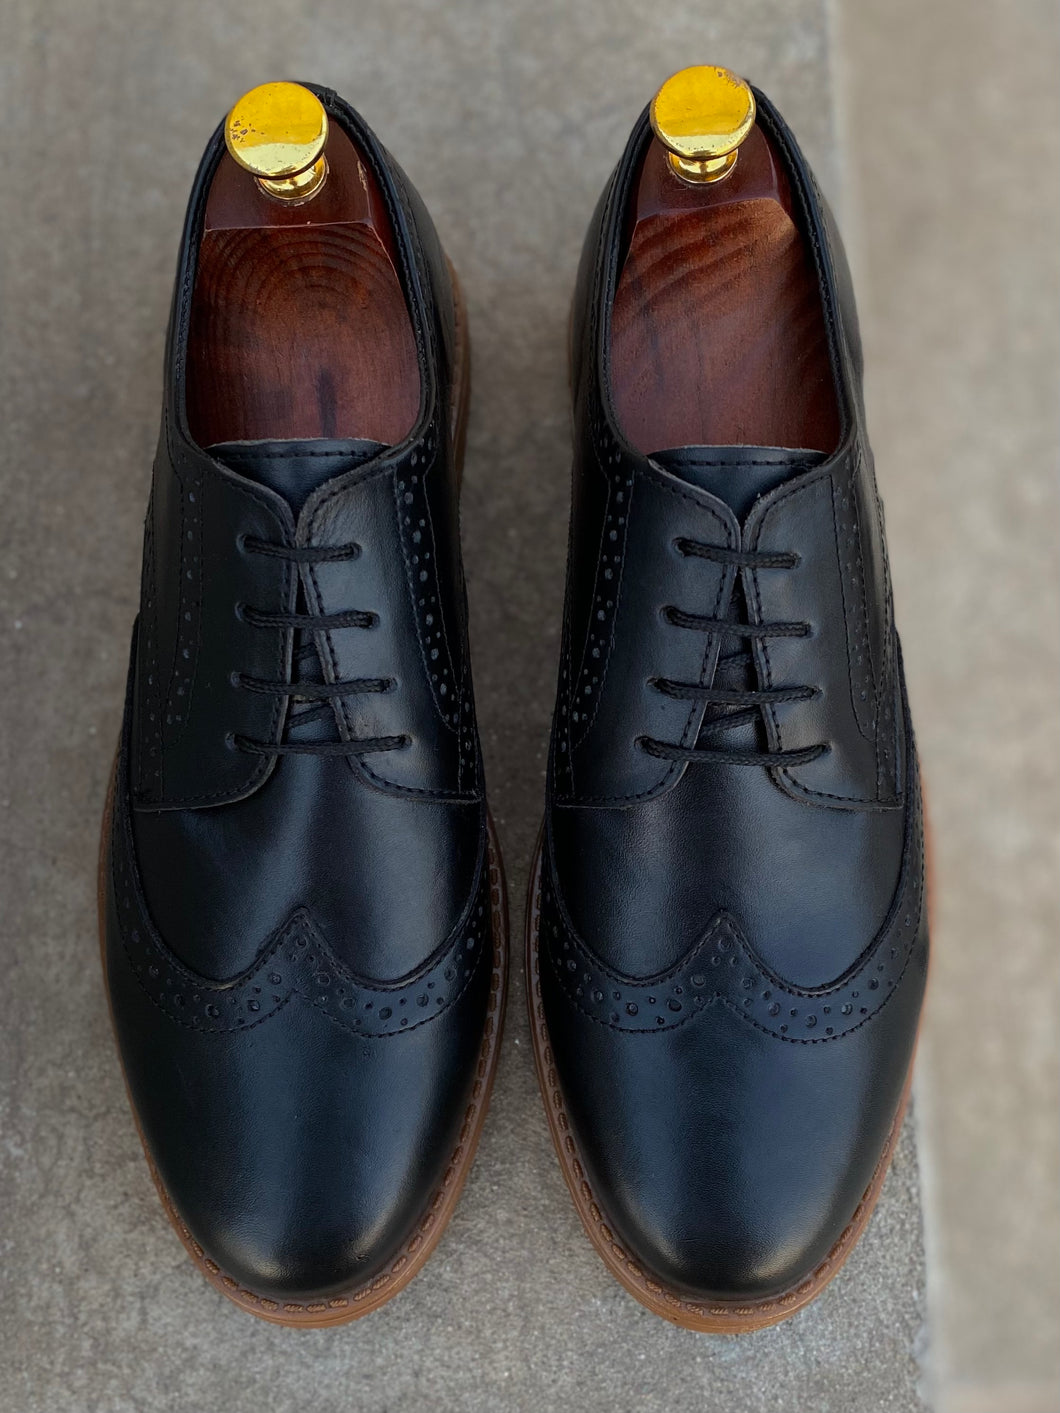 Black Cow Leather Brogue Shoes